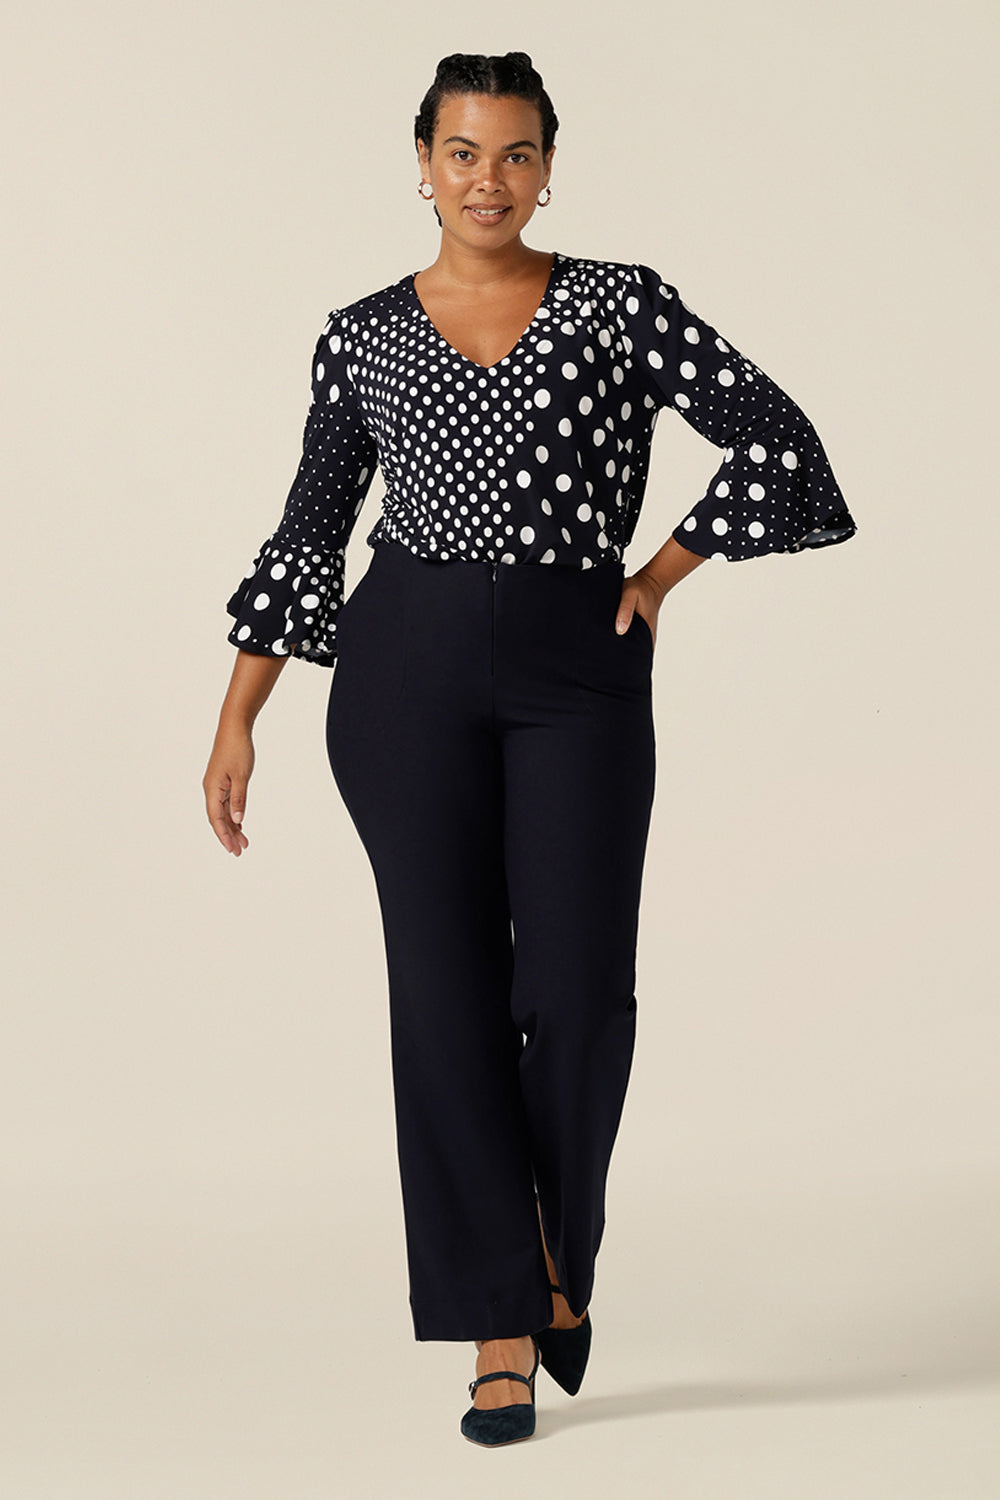 A women's workwear top in navy and white polka dot print. Worn with navy, bootcut flared leg trousers, this top features a V neckline and 3/4 sleeves with fluted cuffs. Shop this Australian-made top in petite to plus size women.